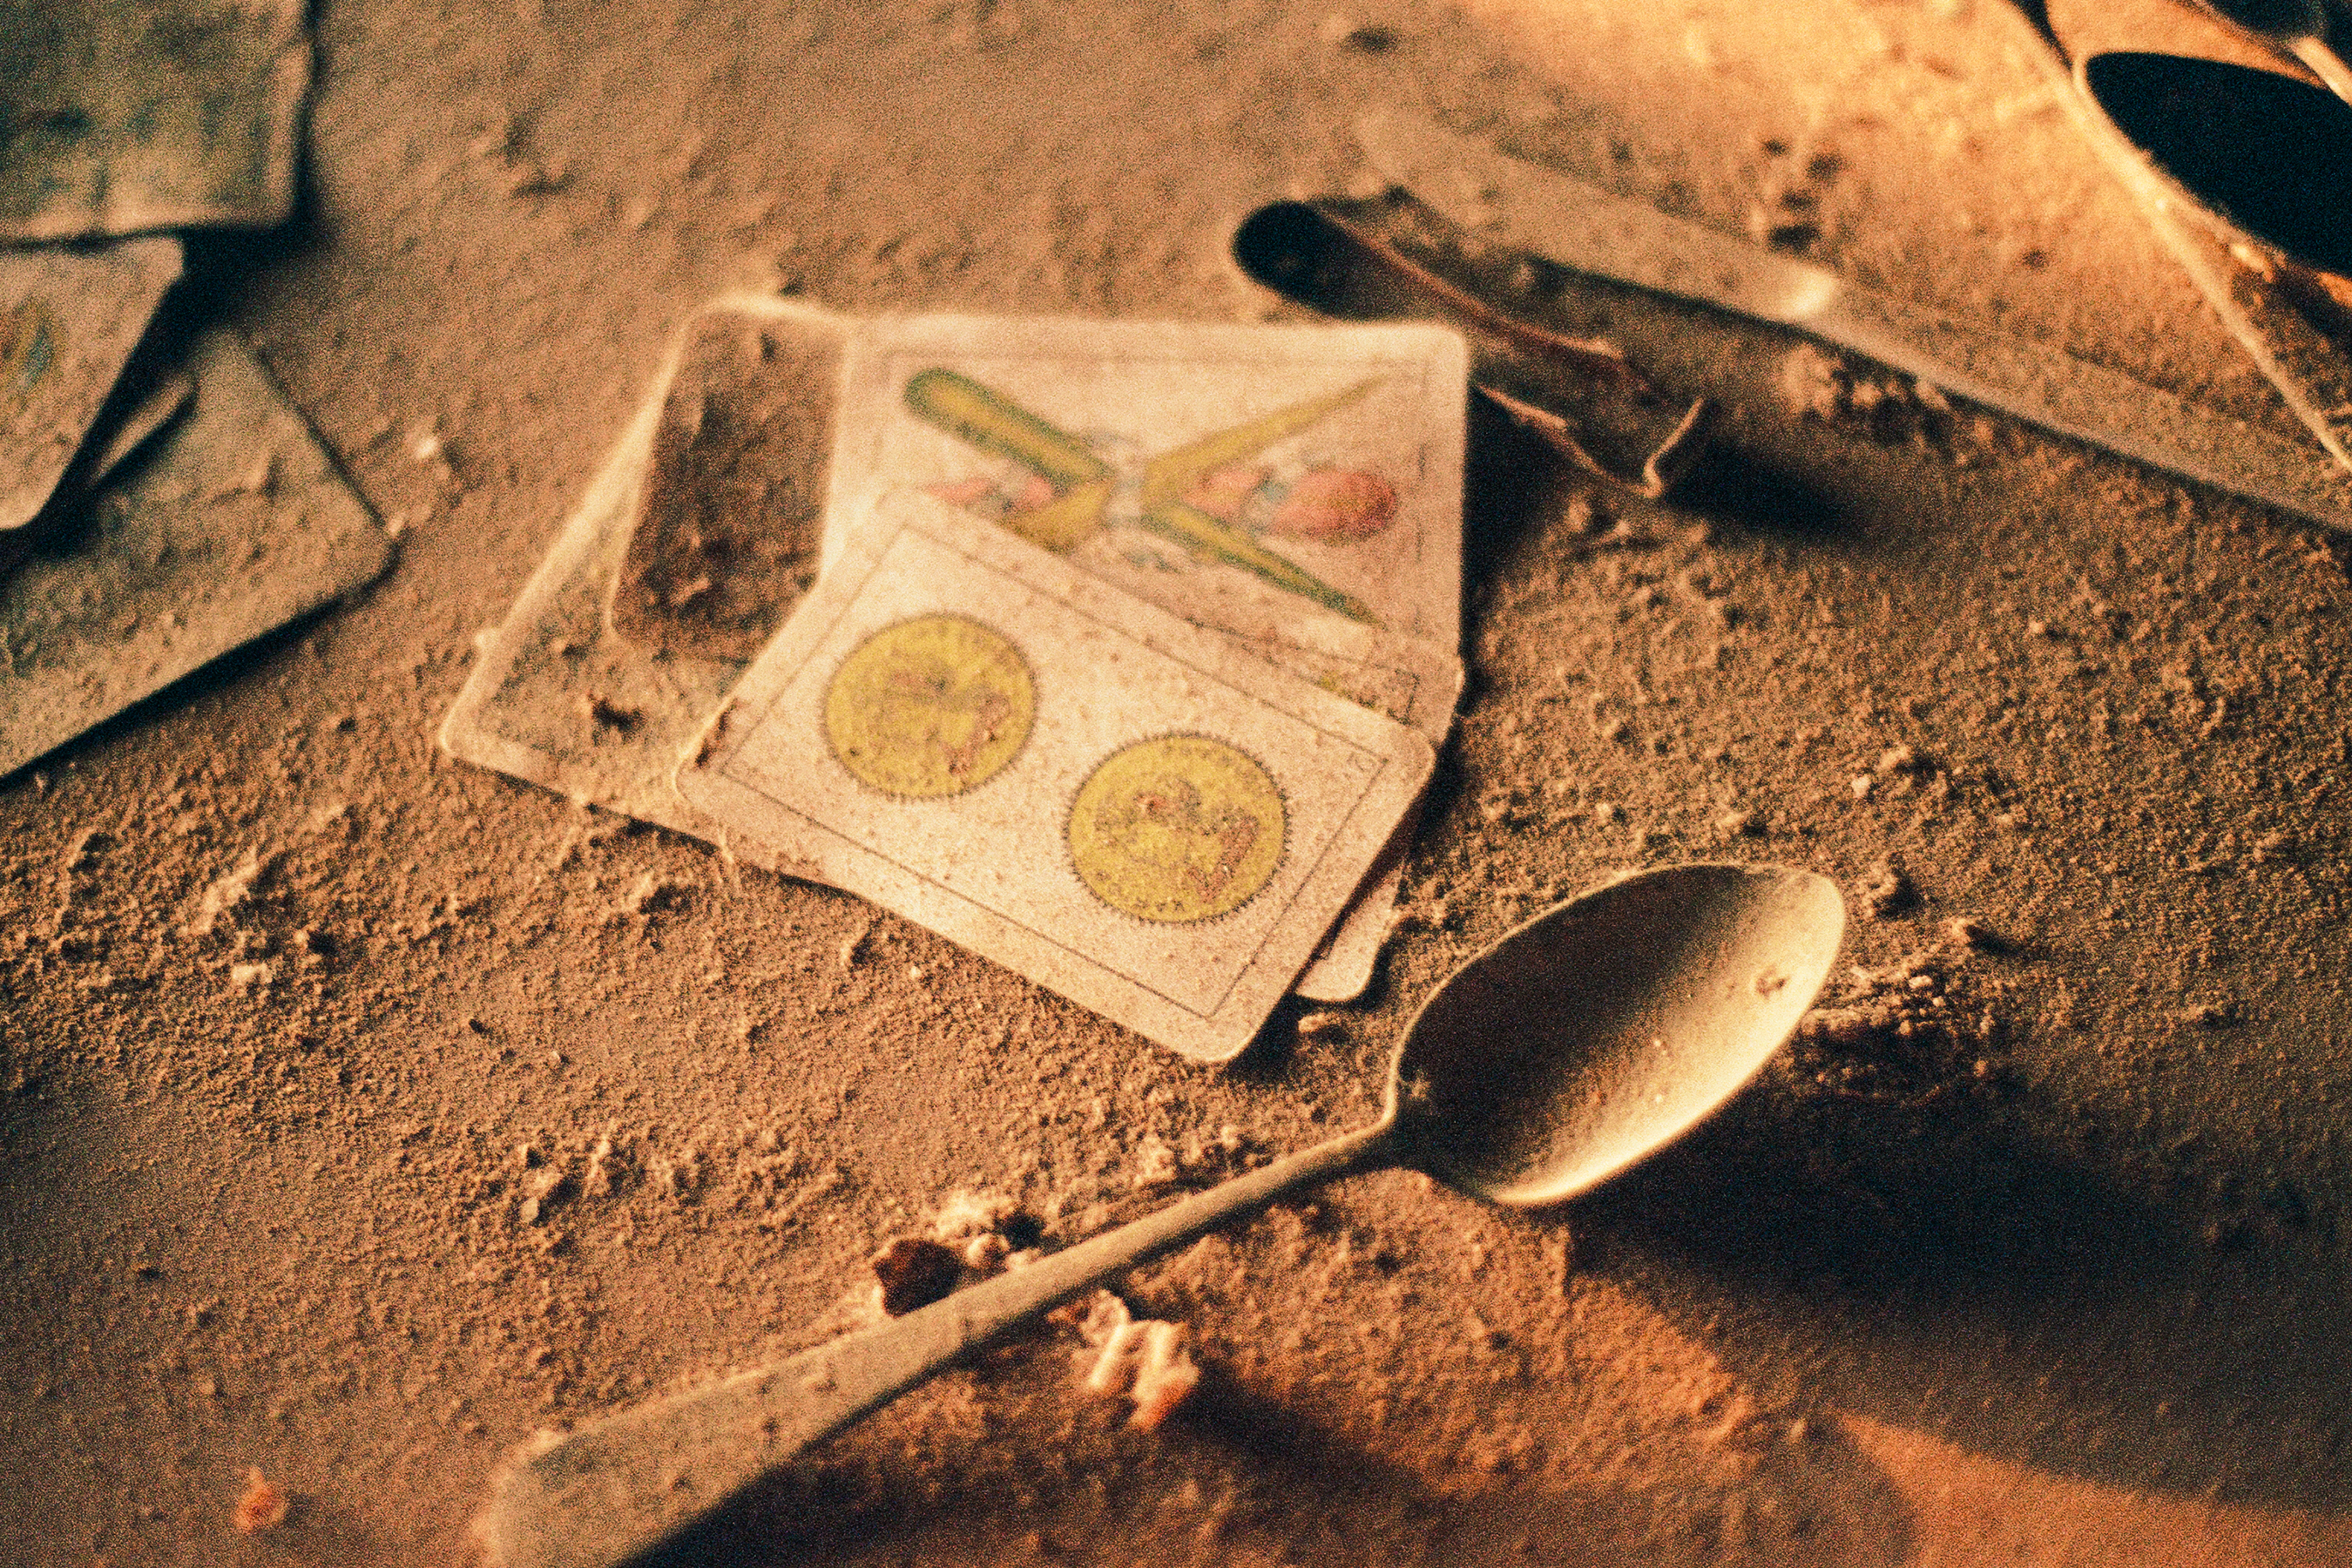 Playing cards on the dirt ground lying next to a spoon